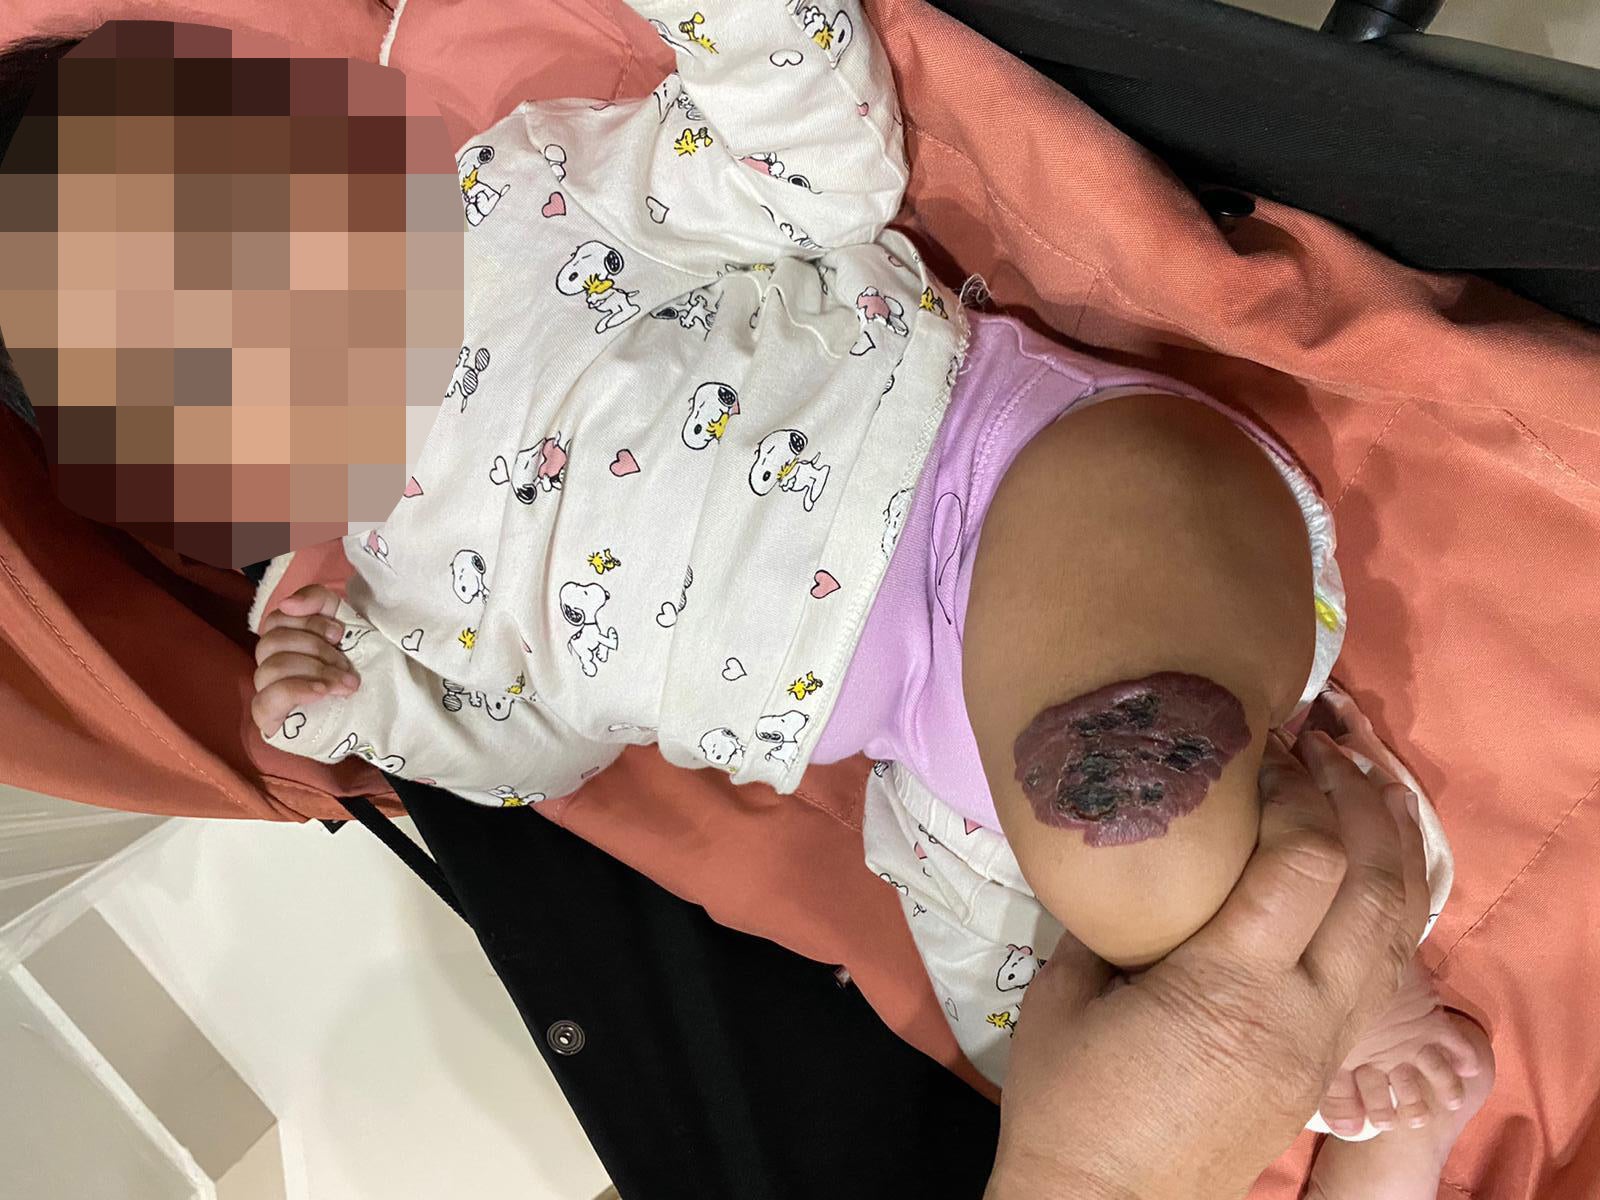 The parents of Aleha, aged four months, waited more than eight hours before being able to take their daughter to hospital for urgent treatment